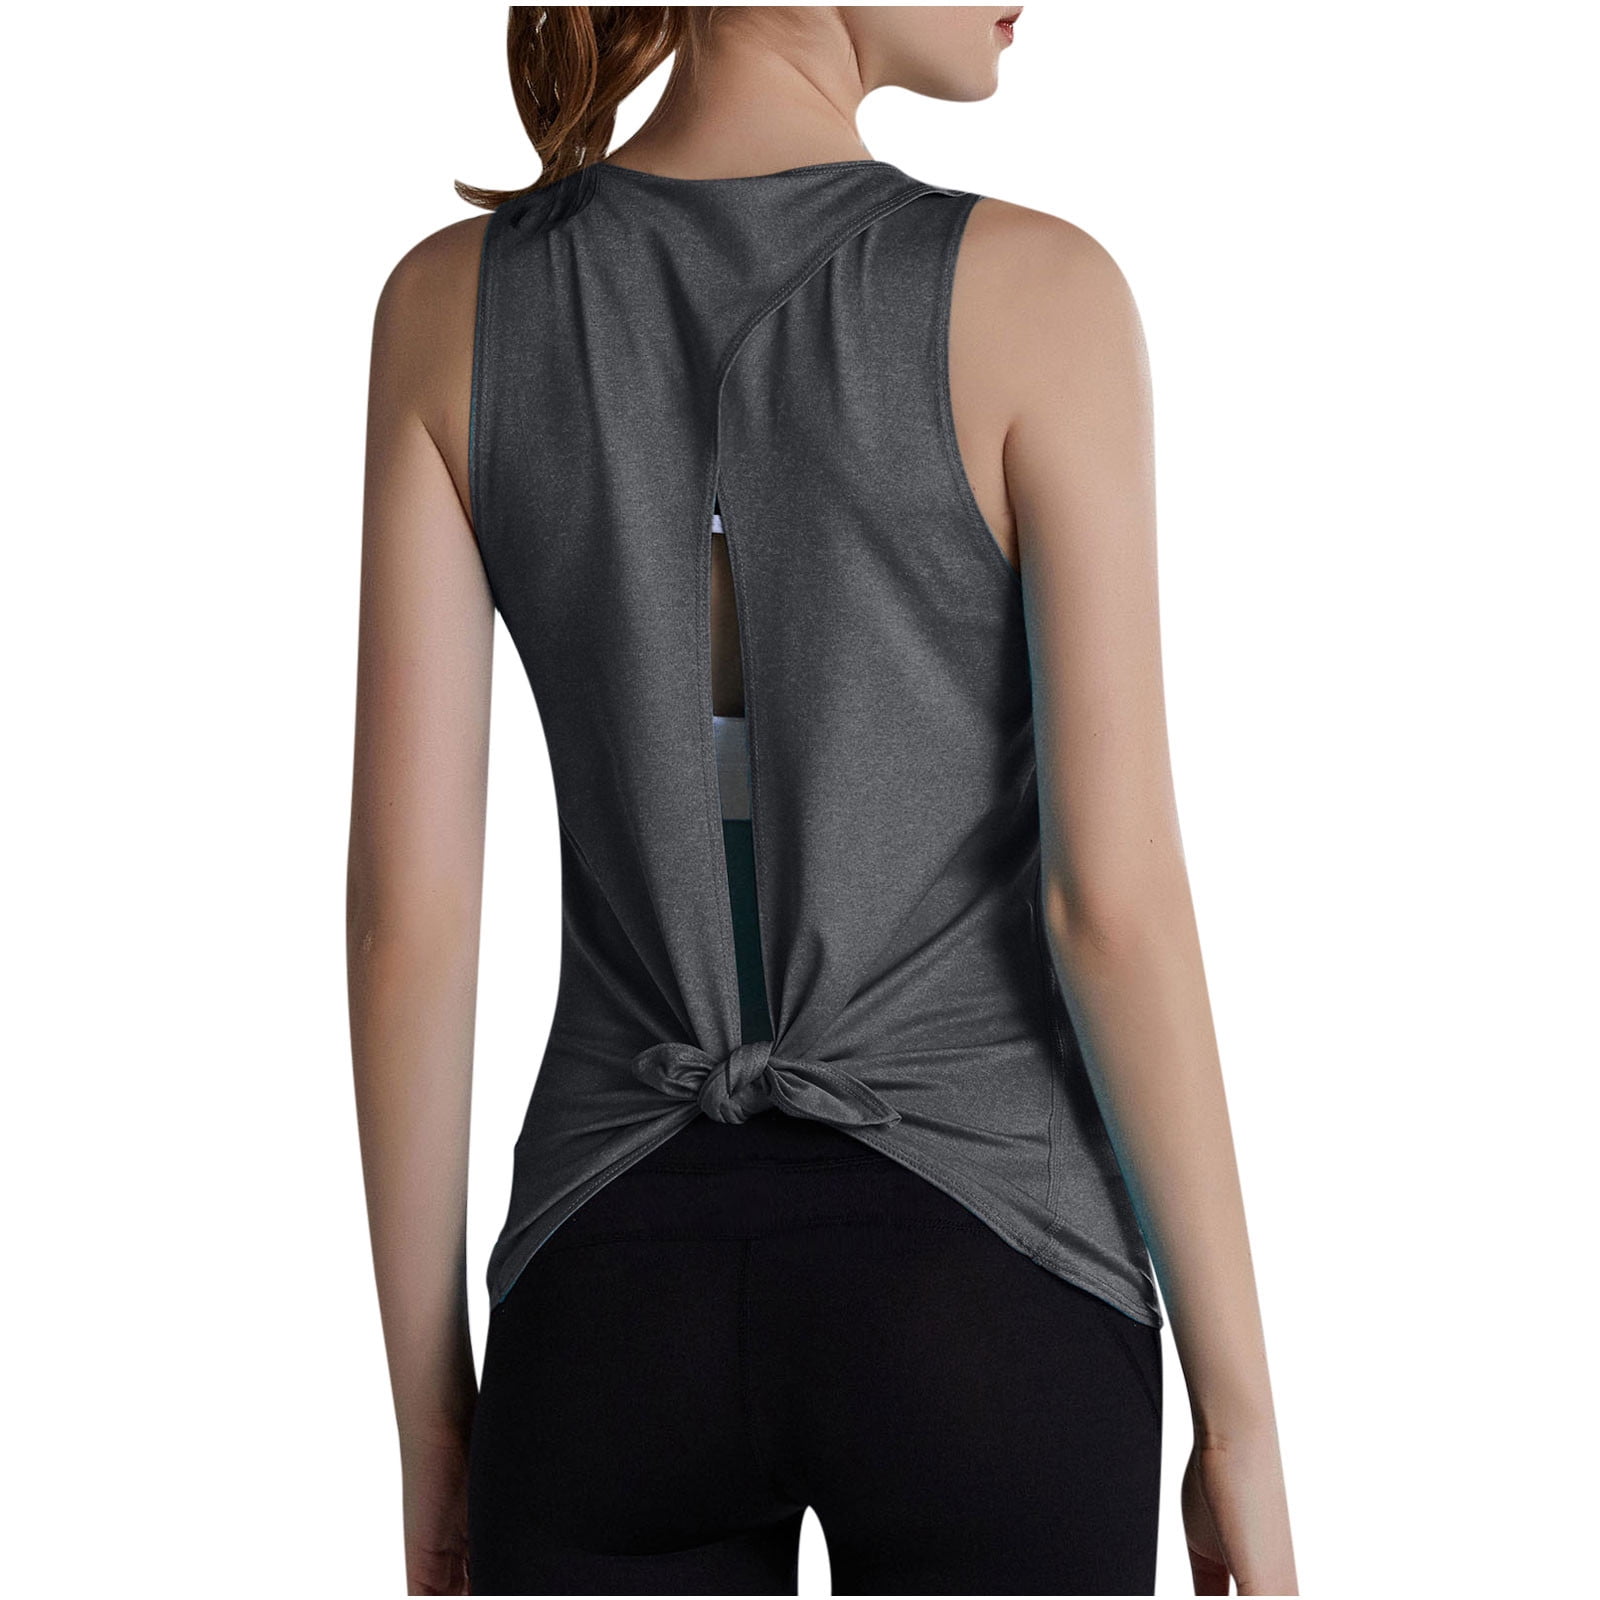 Buy the Womens Sleeveless Open Back Knotted Workout Yoga Tank Top